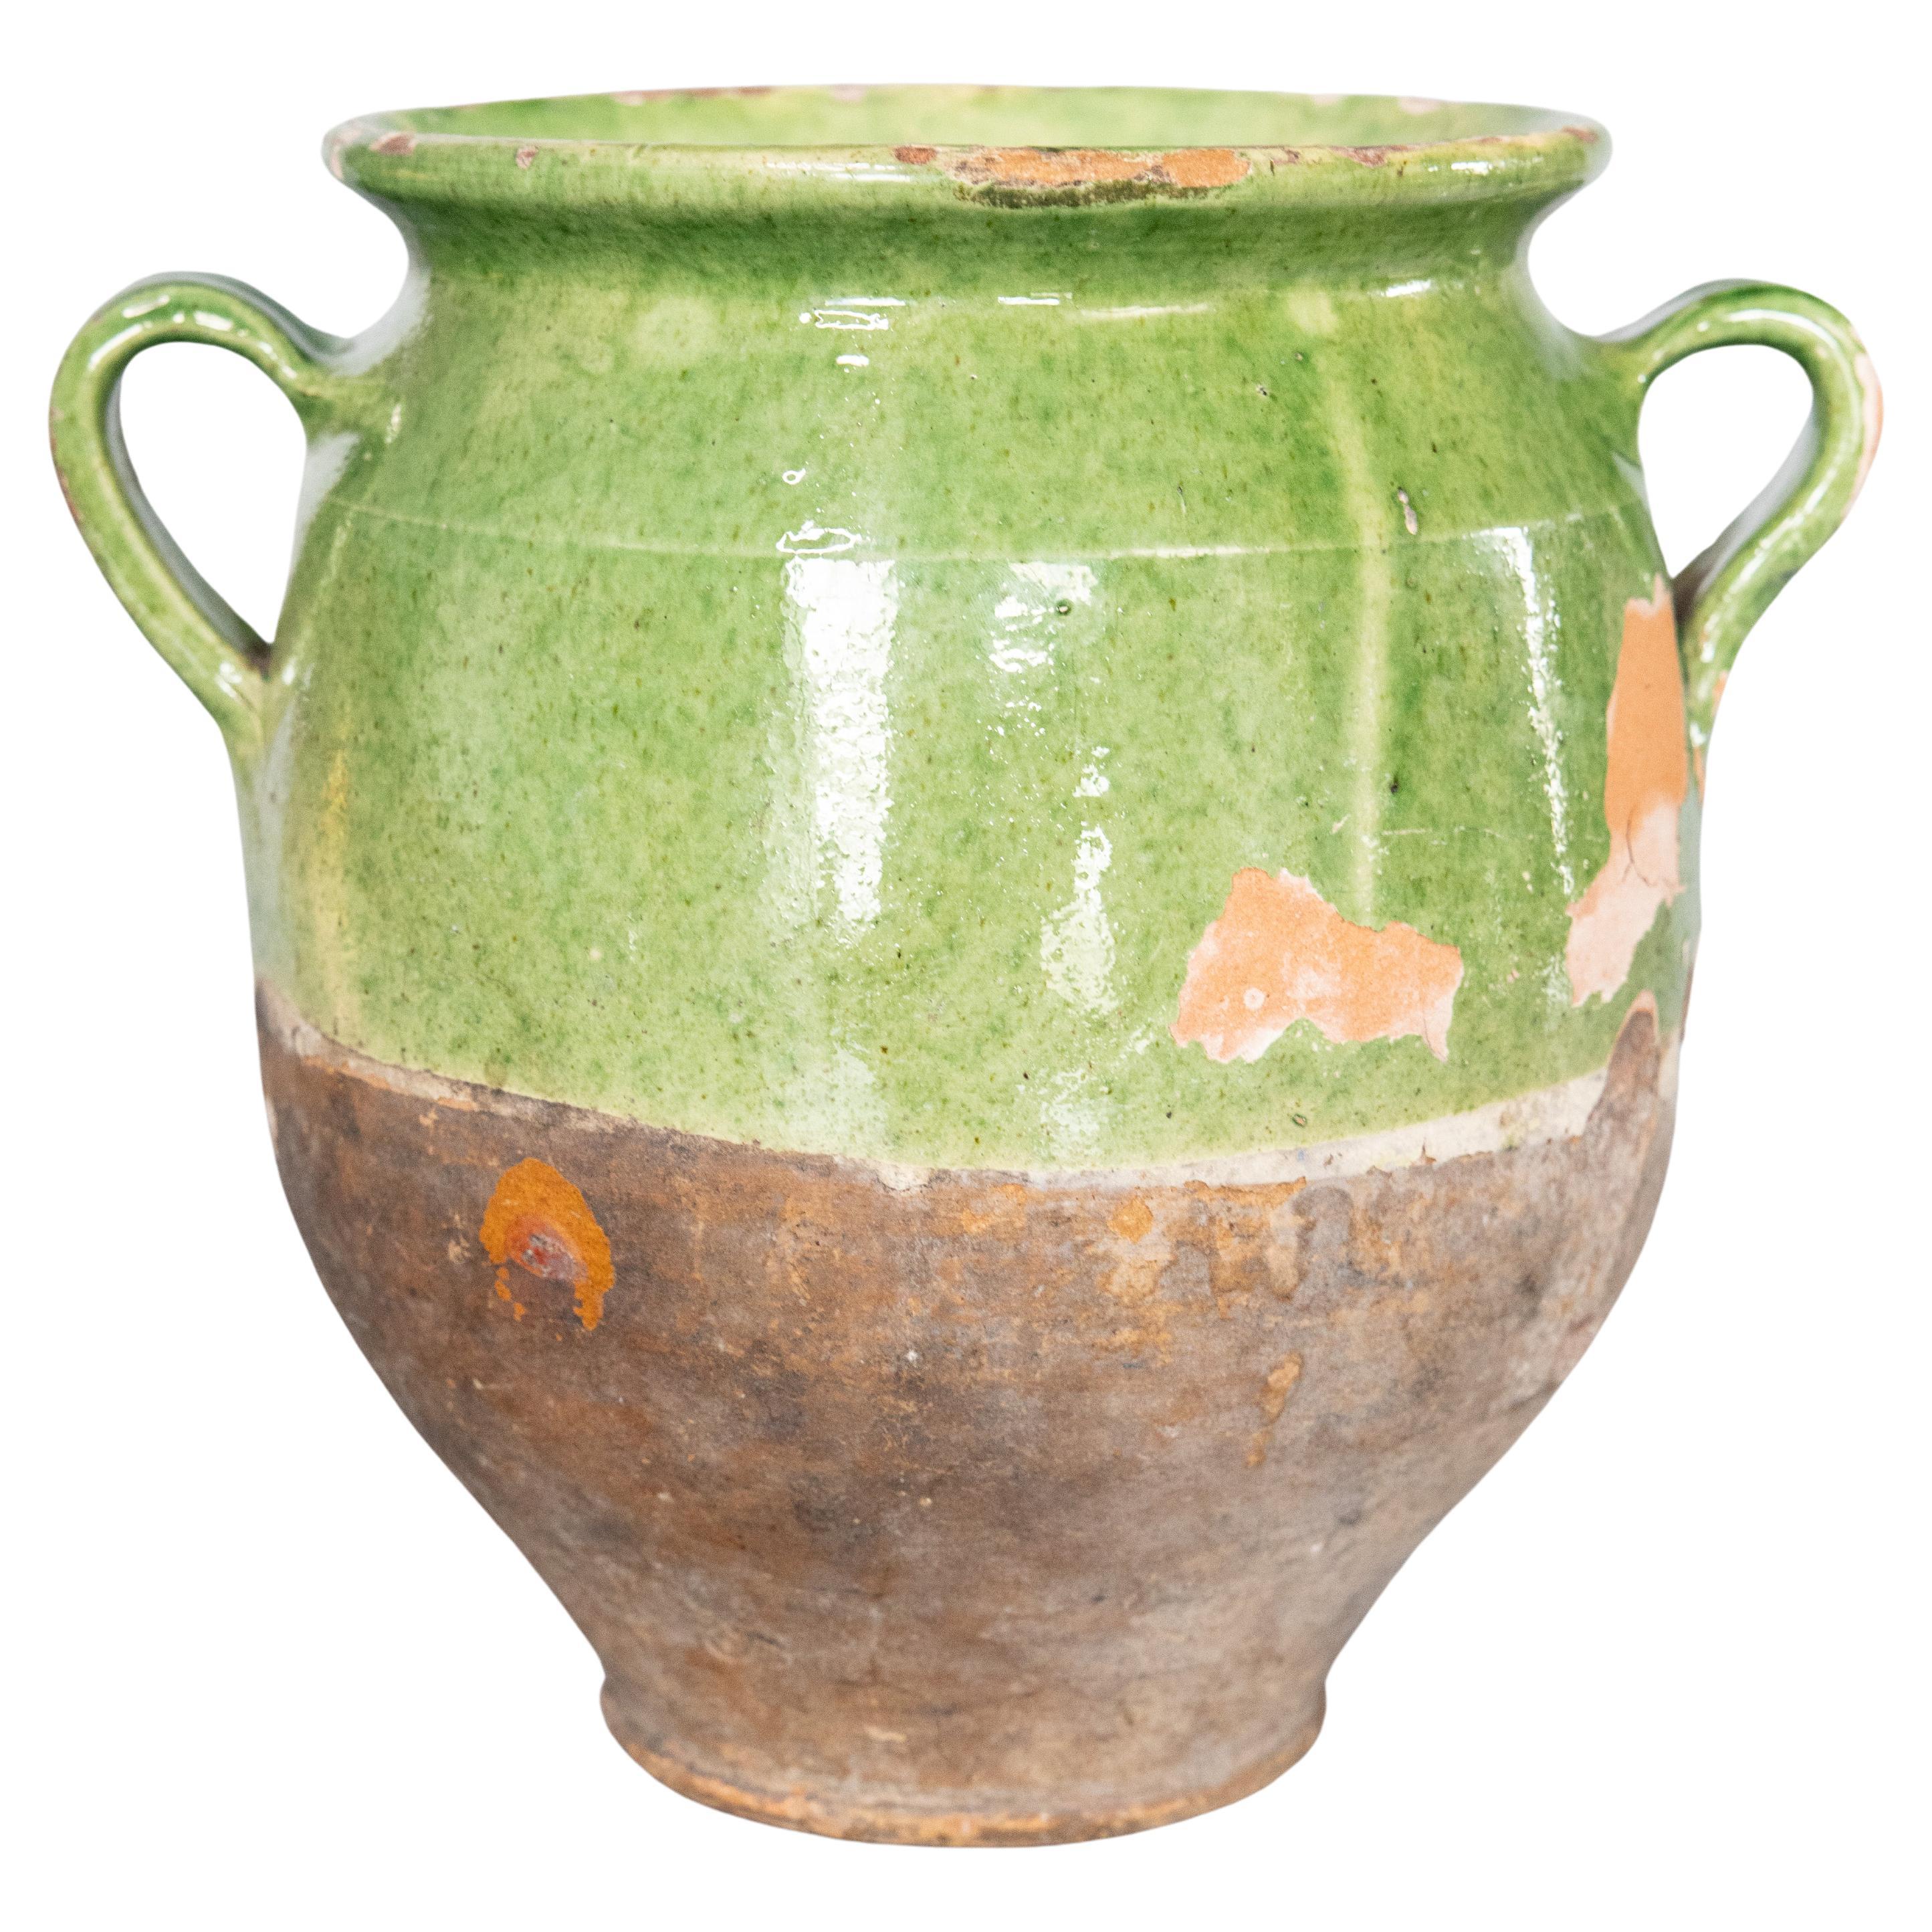 19th Century French Glazed Green Confit Pot